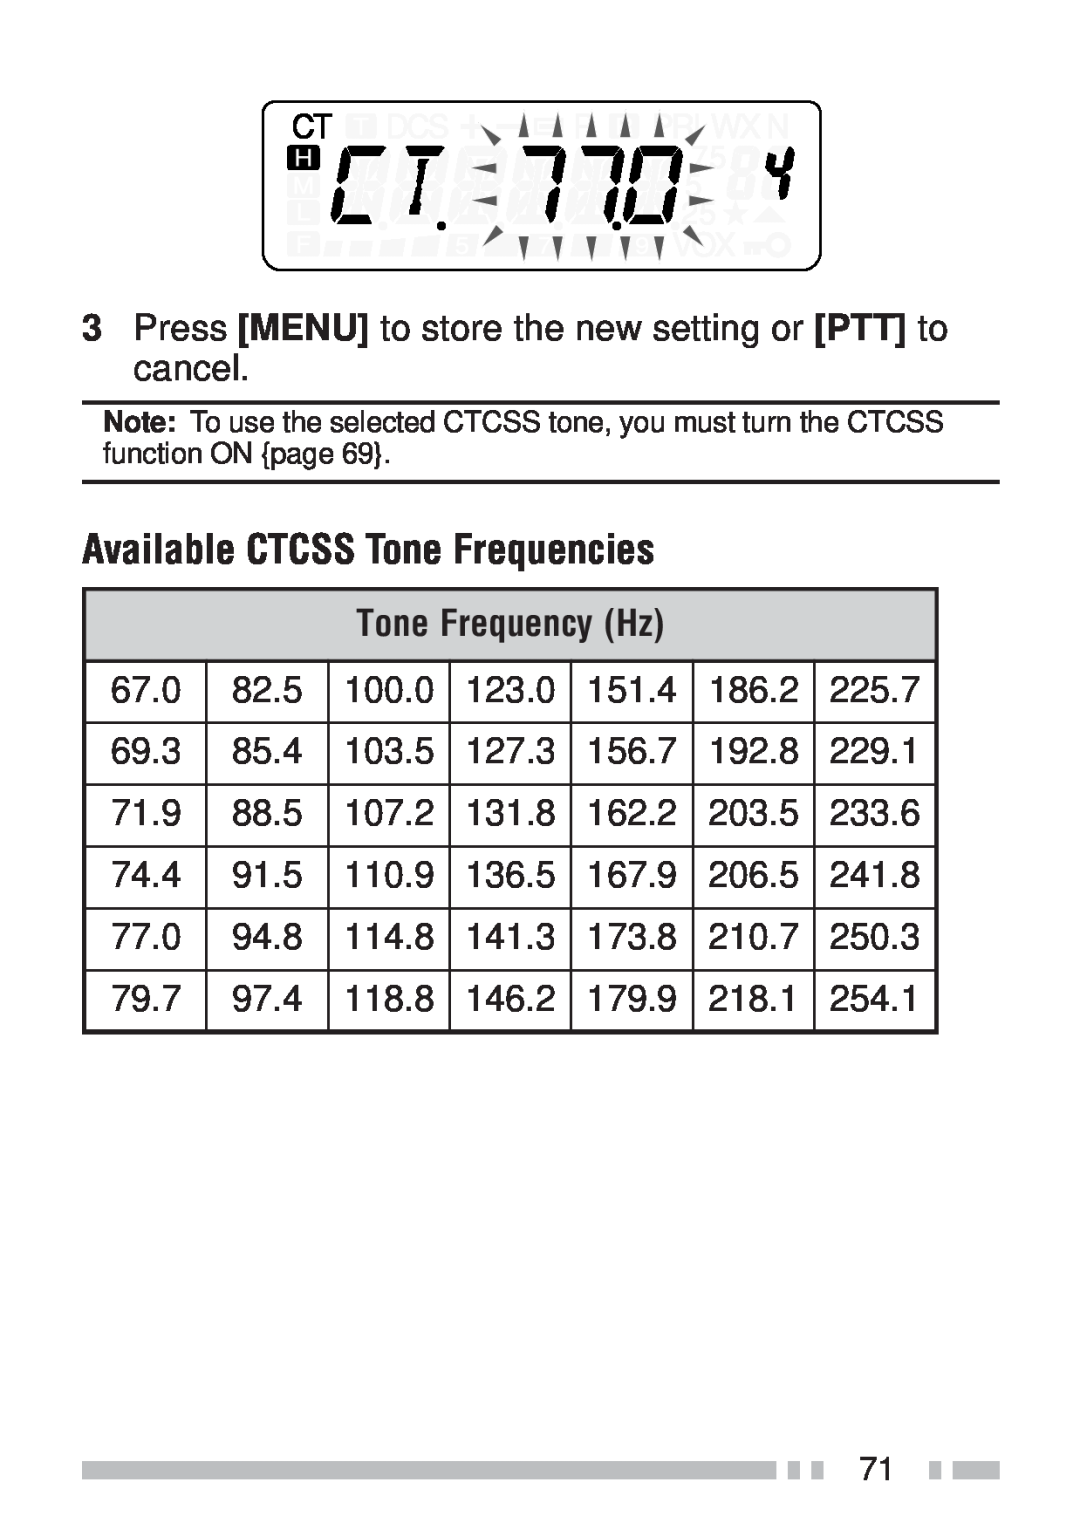 Kenwood TH-KAE, TH-K4AT, TH-K2ET, TH-K2AT instruction manual Available CTCSS Tone Frequencies, Tone Frequency Hz 